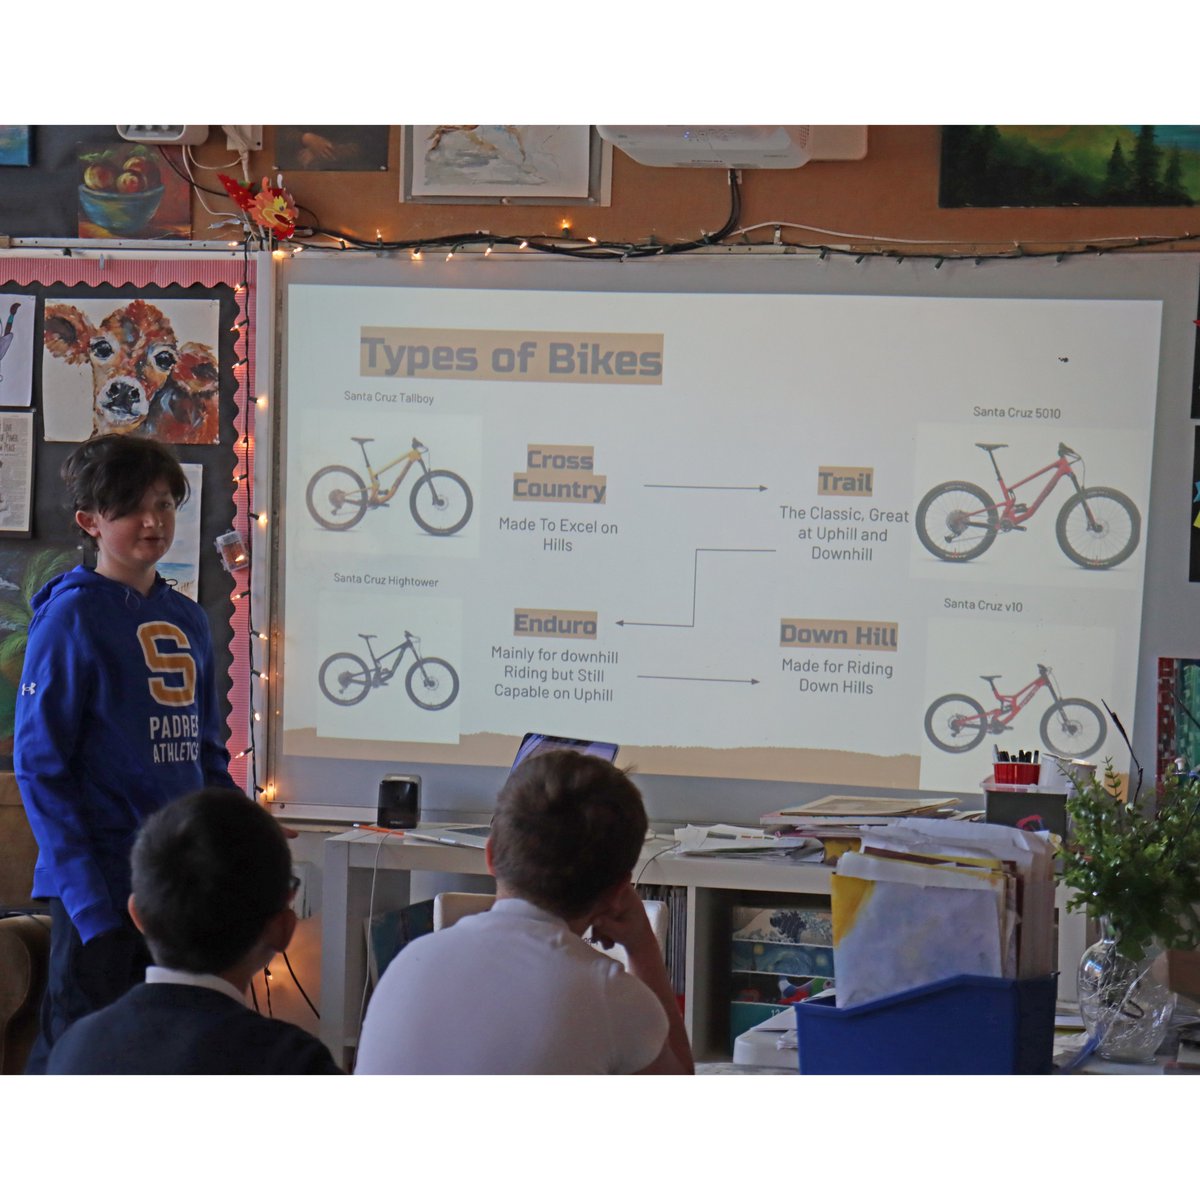 Today, 8th grade students presented topics of their choice to lower and middle school students! Subject matter was wide ranging from aliens, Star Wars, and the fourth dimension, to crocheting, biking, and rowing, to tabla drums, saxophone, and art! Thank you, 8th grade! #8thgrade